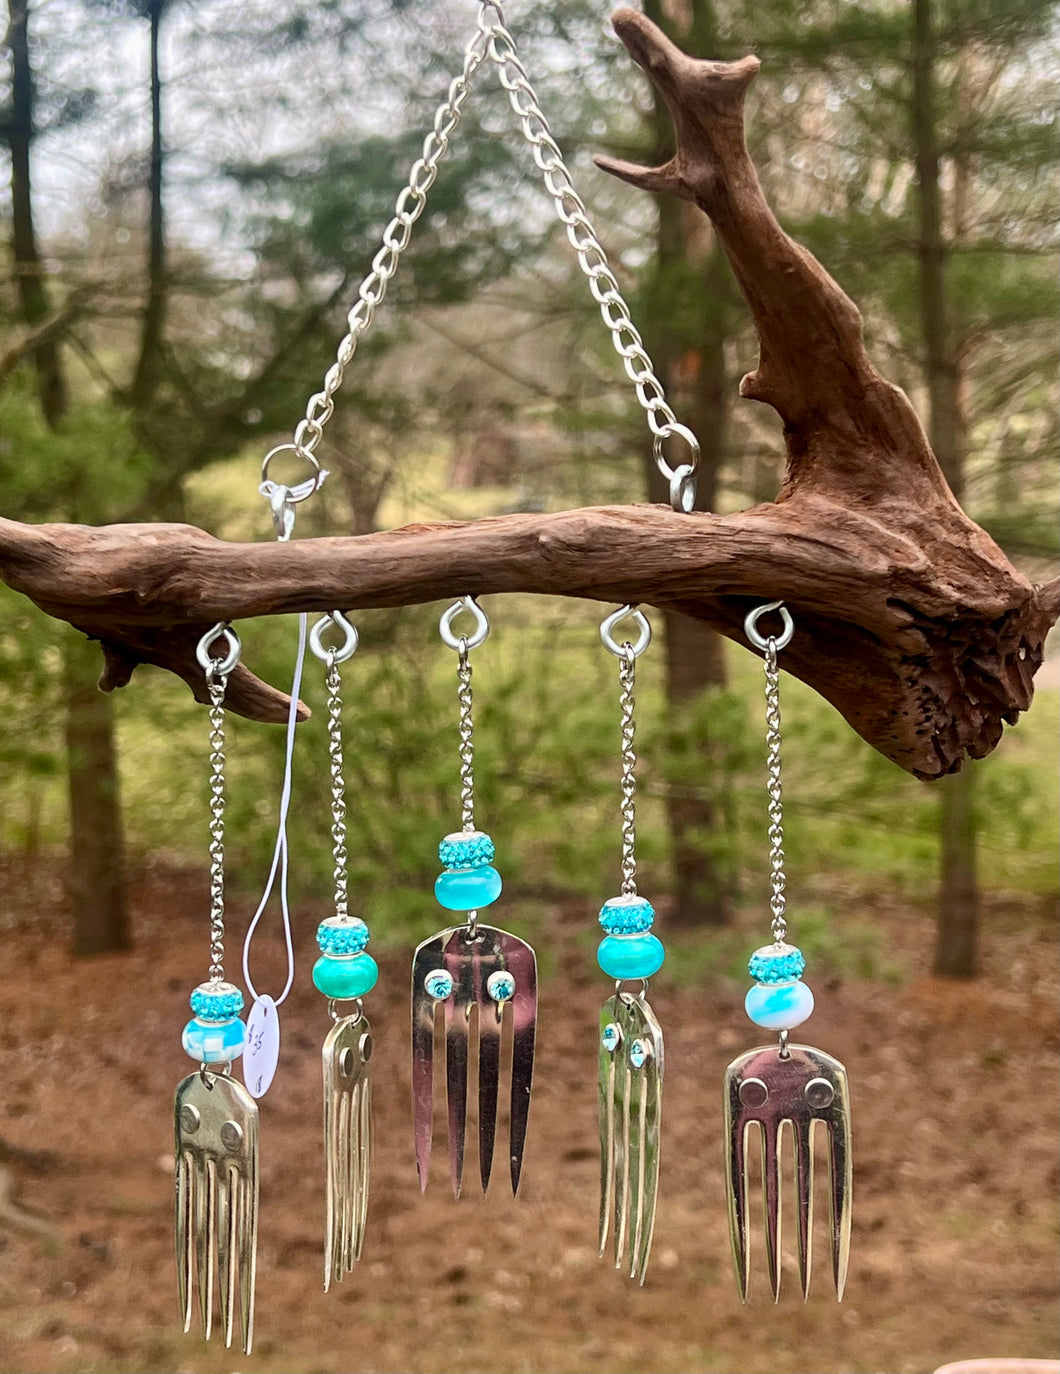 Fork “Jelly Fish” & Driftwood Wind Chime #18